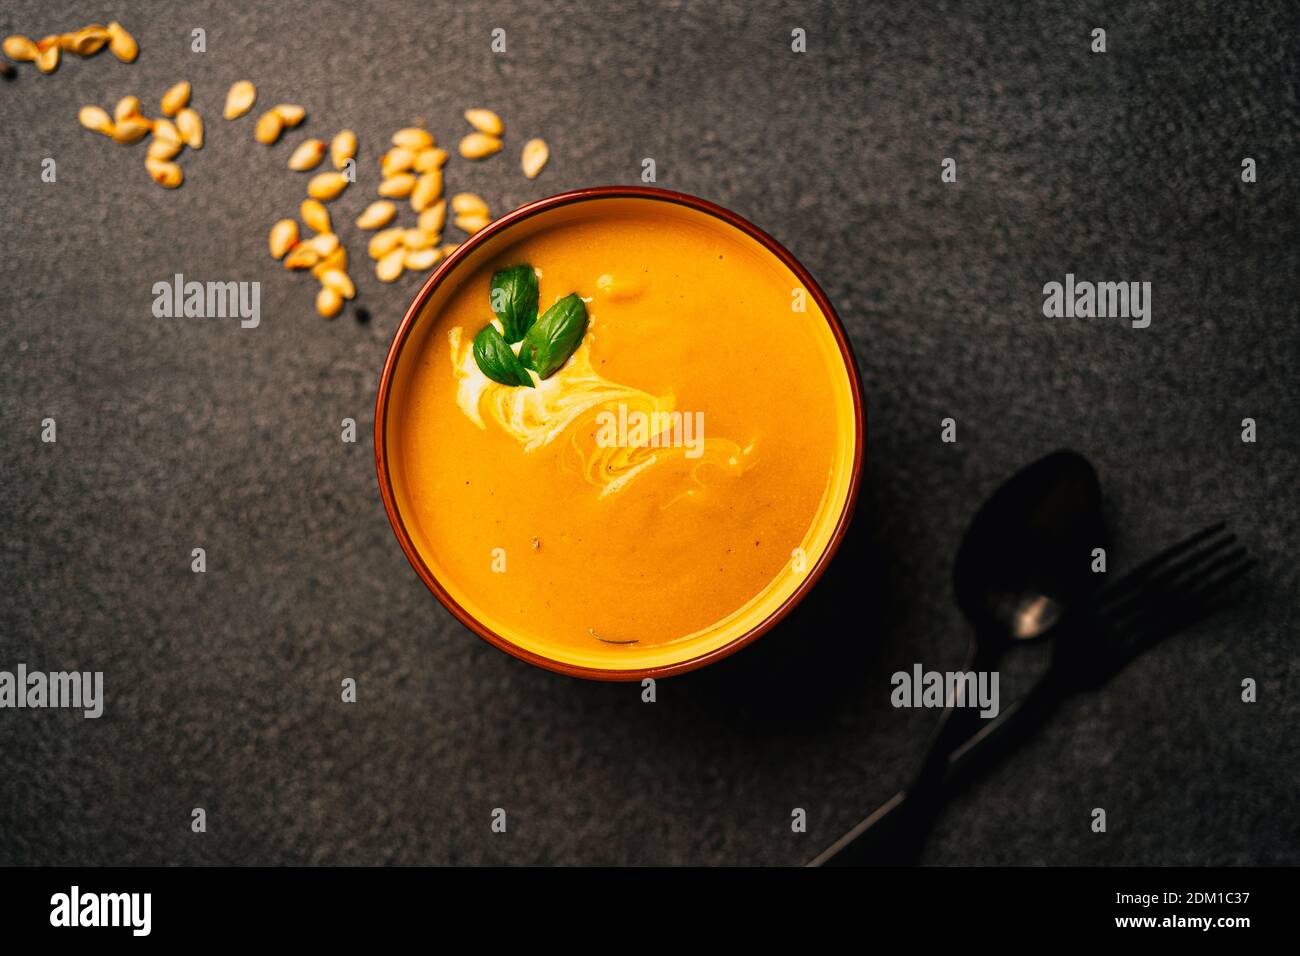 Served creamy bright orange butternut squash soup. Creamed blended yellow and orange vegetables, rich in carotene.Pumpkin seeds.Delicious homemade die Stock Photo